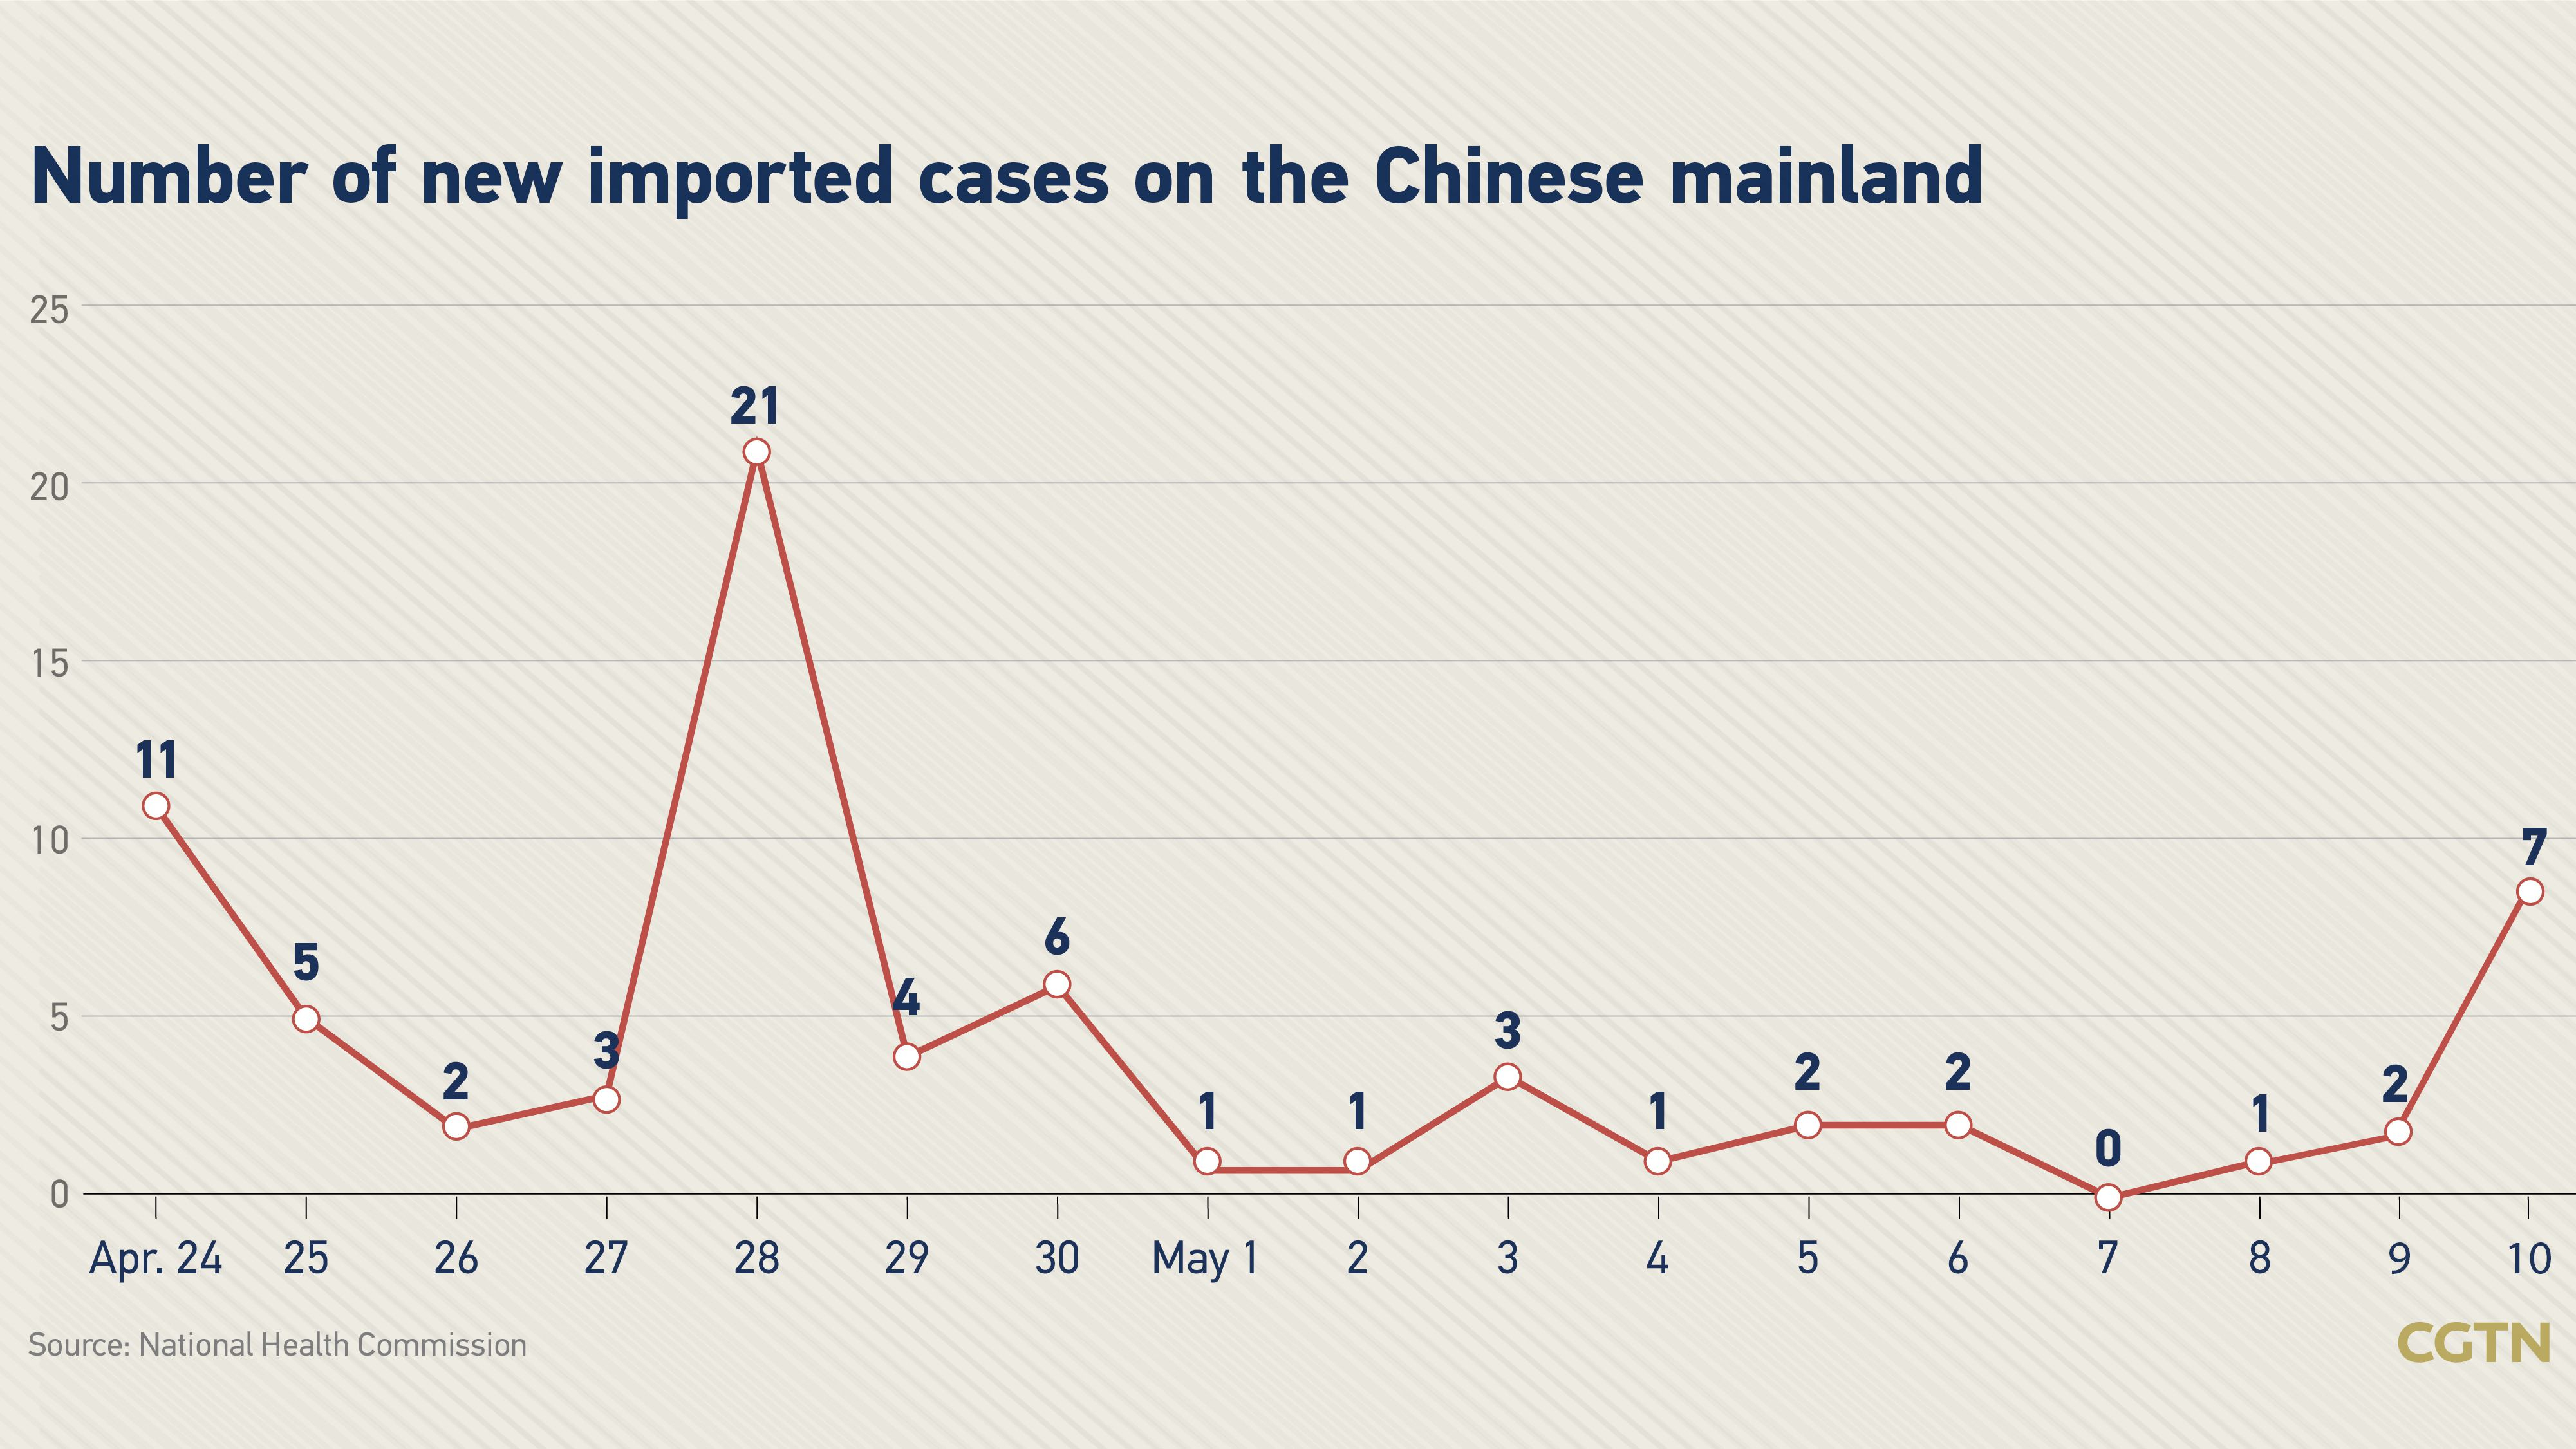 https://news.cgtn.com/news/2020-05-11/Chinese-mainland-reports-17-new-COVID-19-cases-no-new-deaths-QoIY4SWLqE/index.html